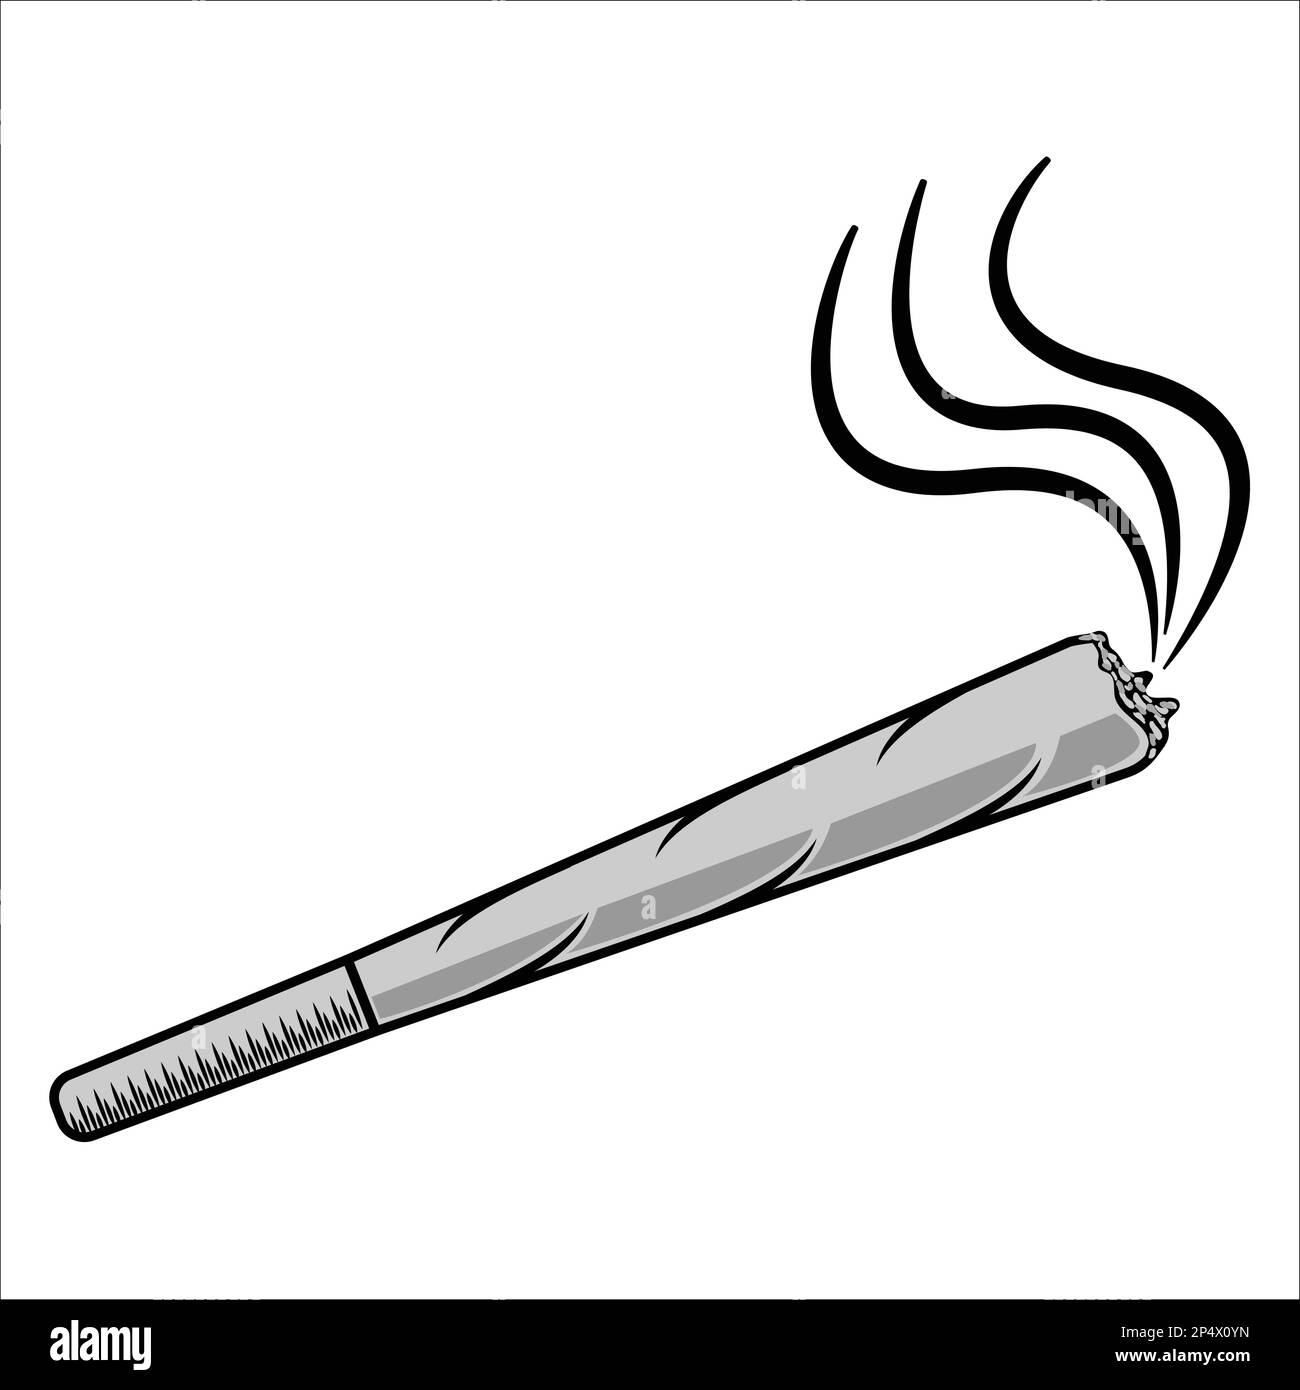 Vector illustration Marijuana rolled joint cigarette isolated on white background. Stock Vector